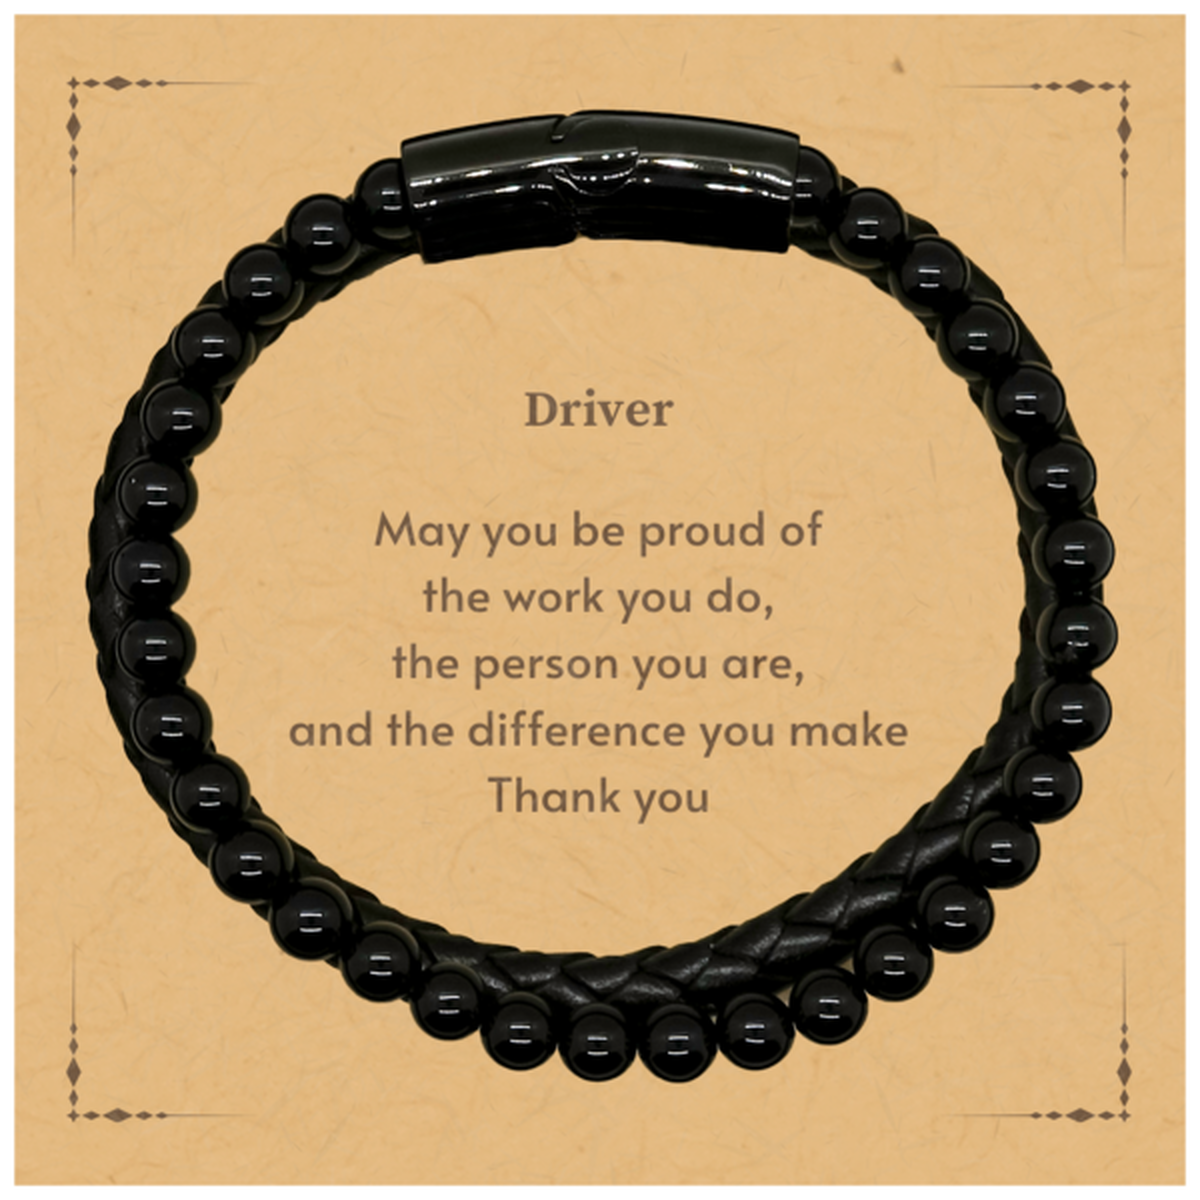 Heartwarming Stone Leather Bracelets Retirement Coworkers Gifts for Driver, Driver May You be proud of the work you do, the person you are Gifts for Boss Men Women Friends